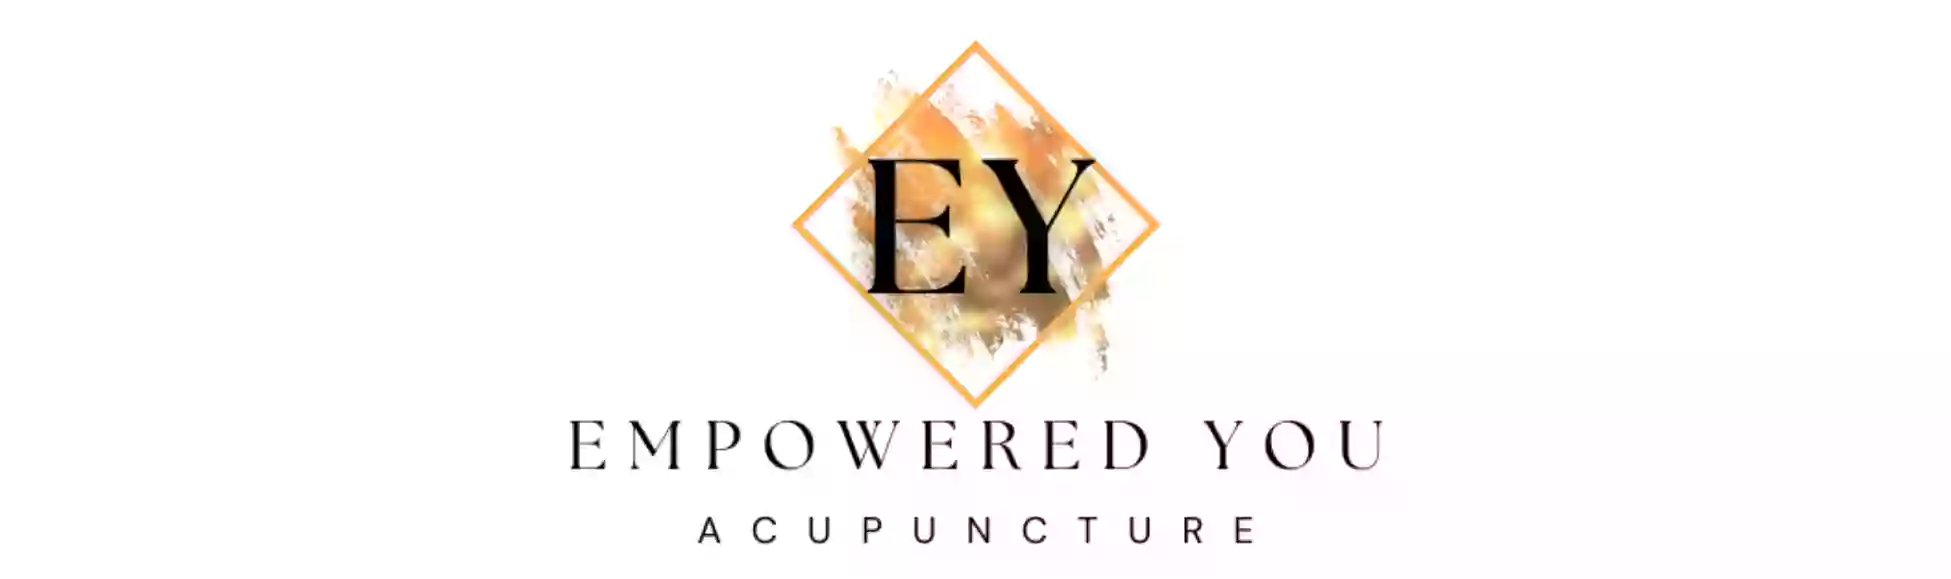 Empowered You Acupuncture